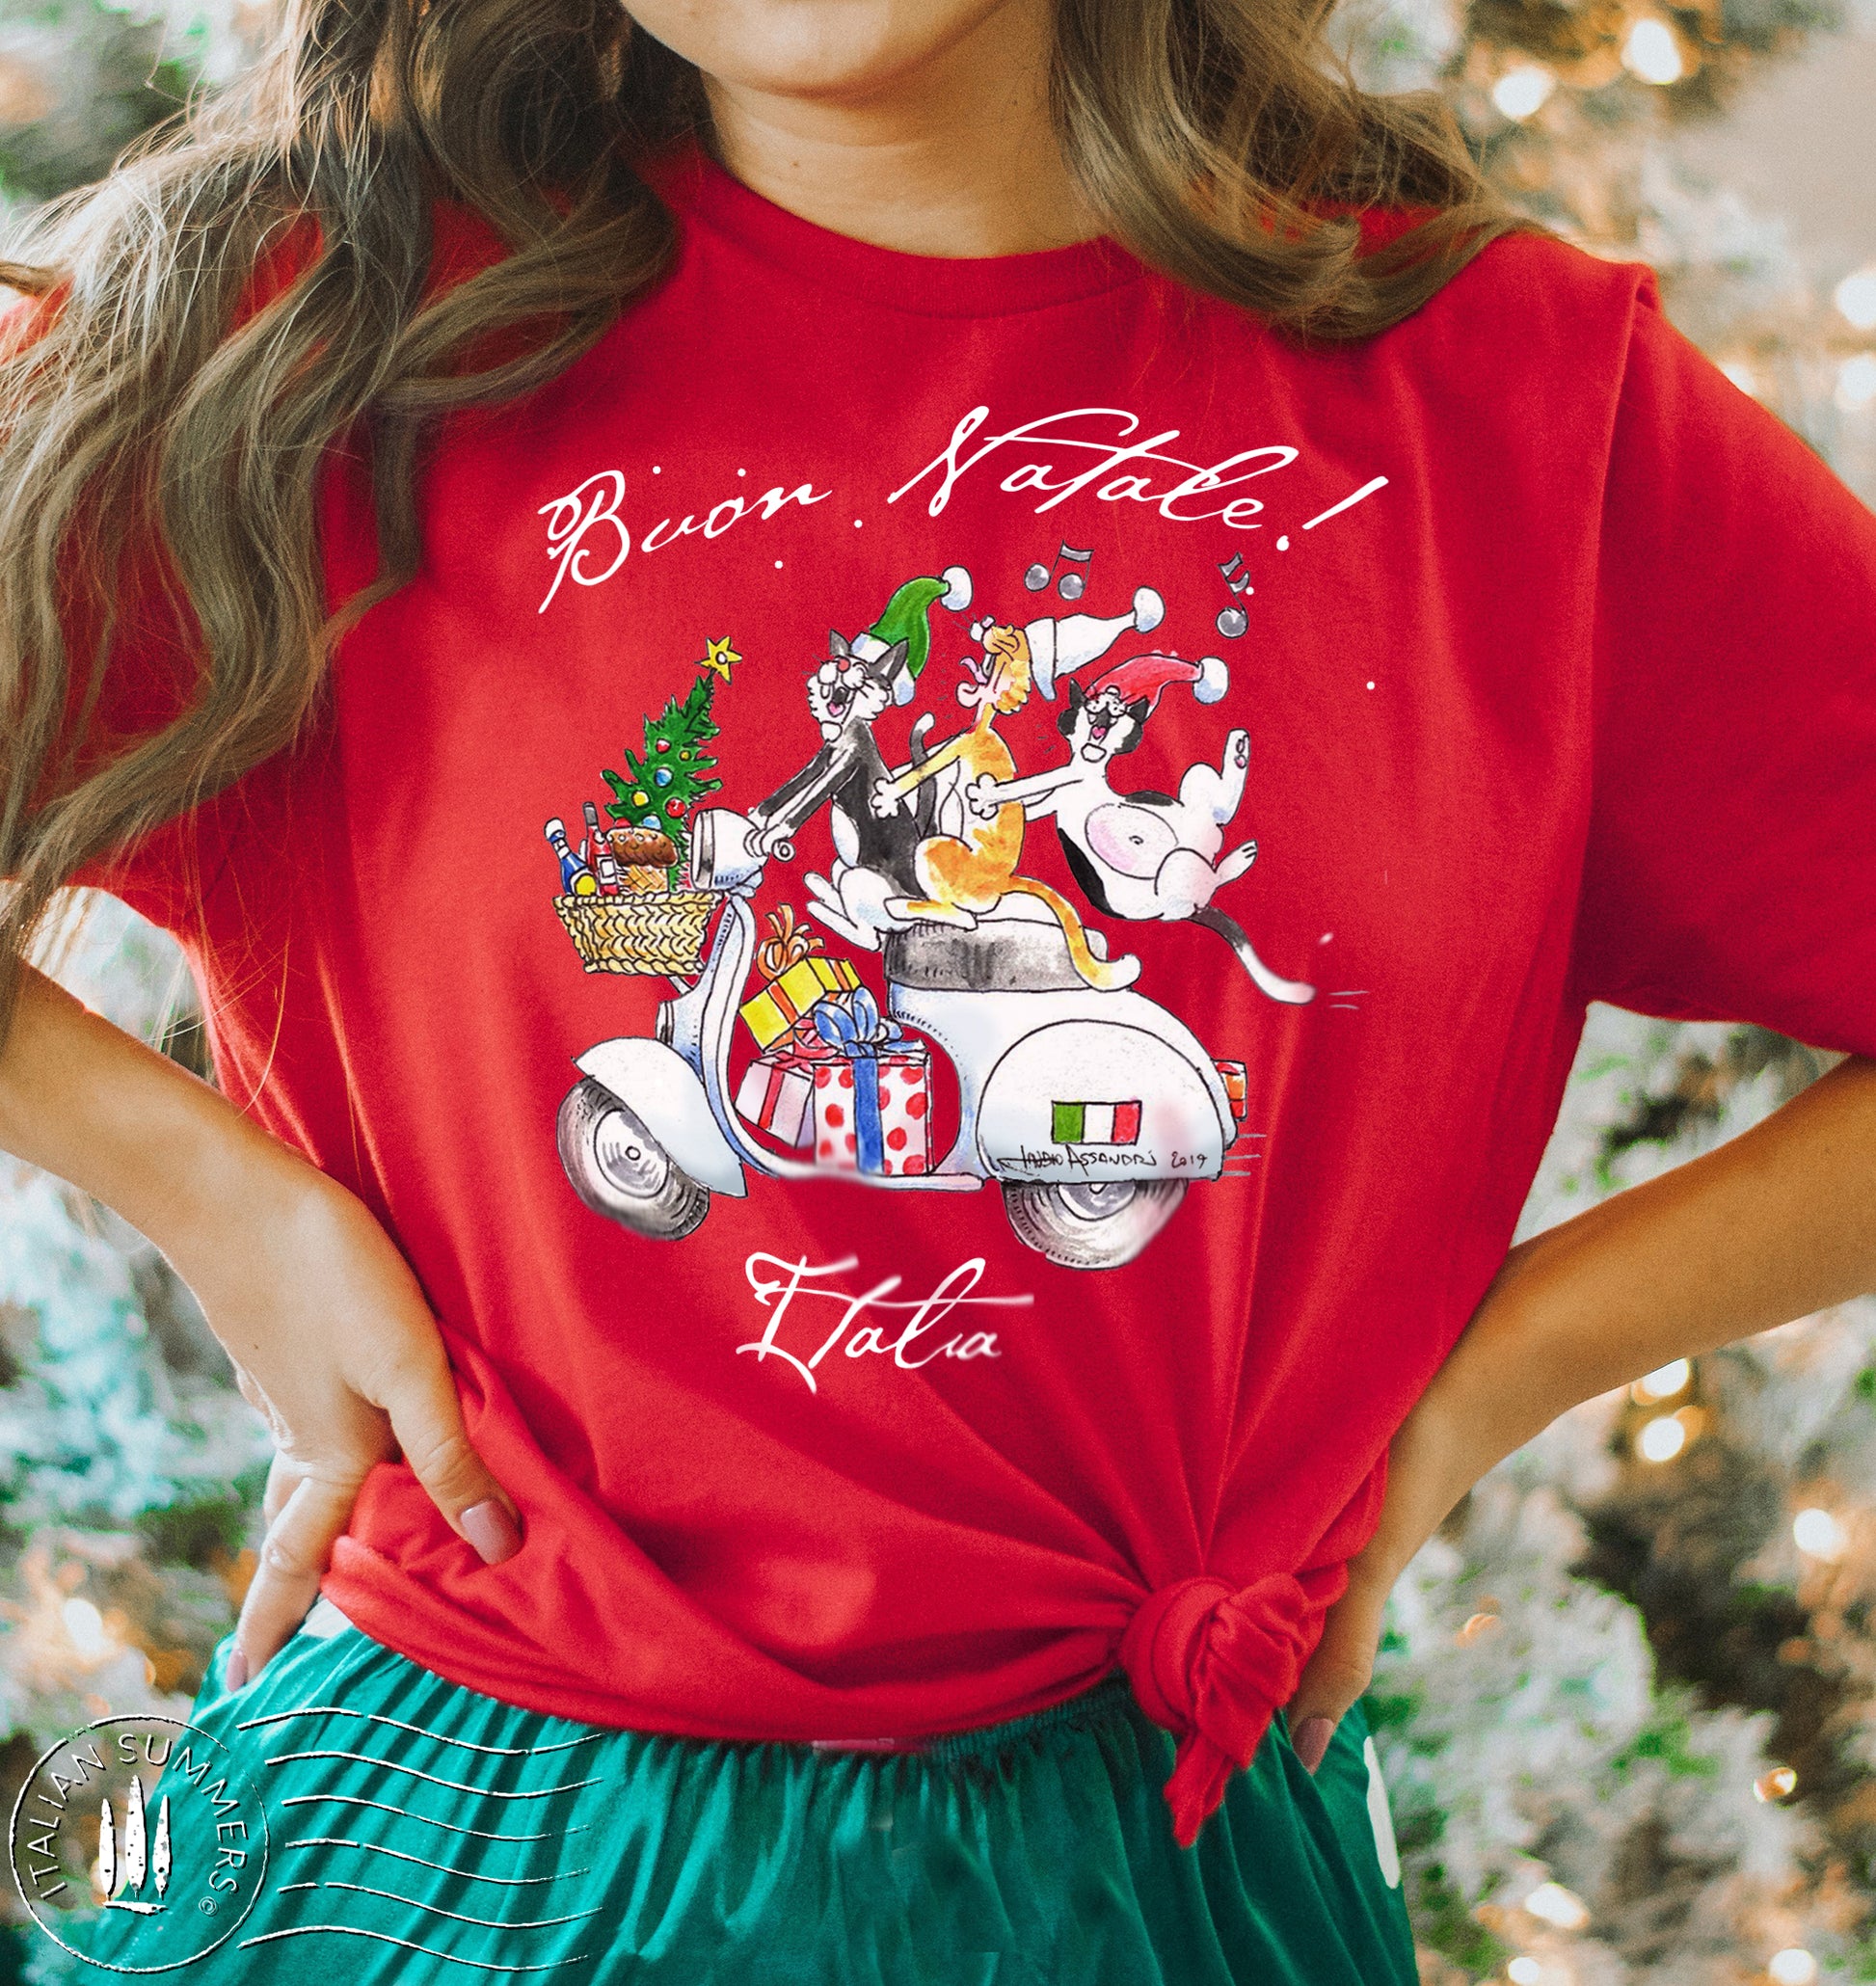 A girl is wearing a red T Shirt with a happy print of a drawing of three Italian cats riding a vintage white Vespa scooter and singing  "Buon Natale!"  - Merry Christmas In Italian.